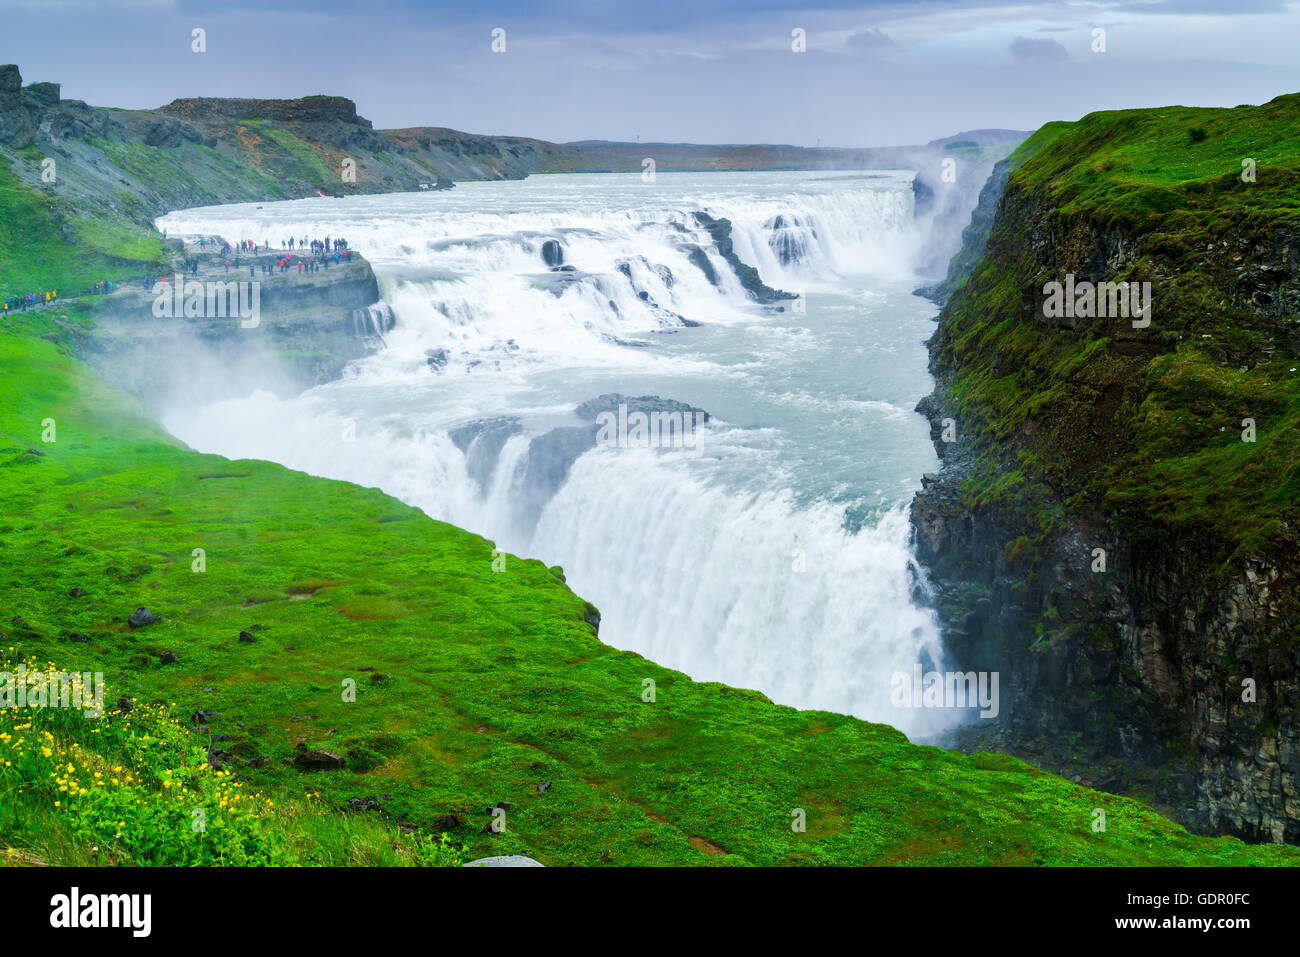 Famous Gullfoss Waterfalls in the canyon of the Hvita river in southwest Iceland Stock Photo